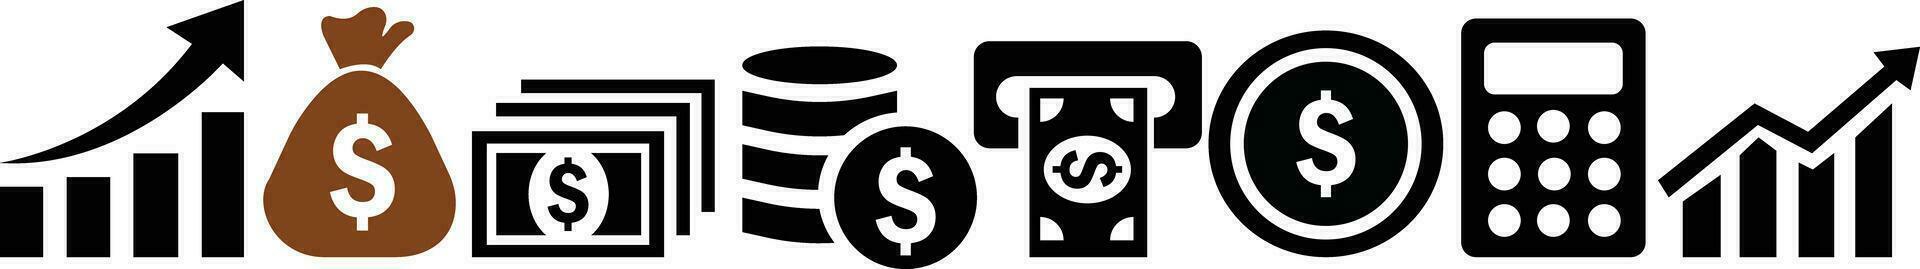 Set of Finance icons. Business Icons, money signs. Money silhouette. Coins silhouette icon. Growth chart. Moneybag or stash. Calculator sign. Piggy bank flat style. coins stack and dollar symbols vector